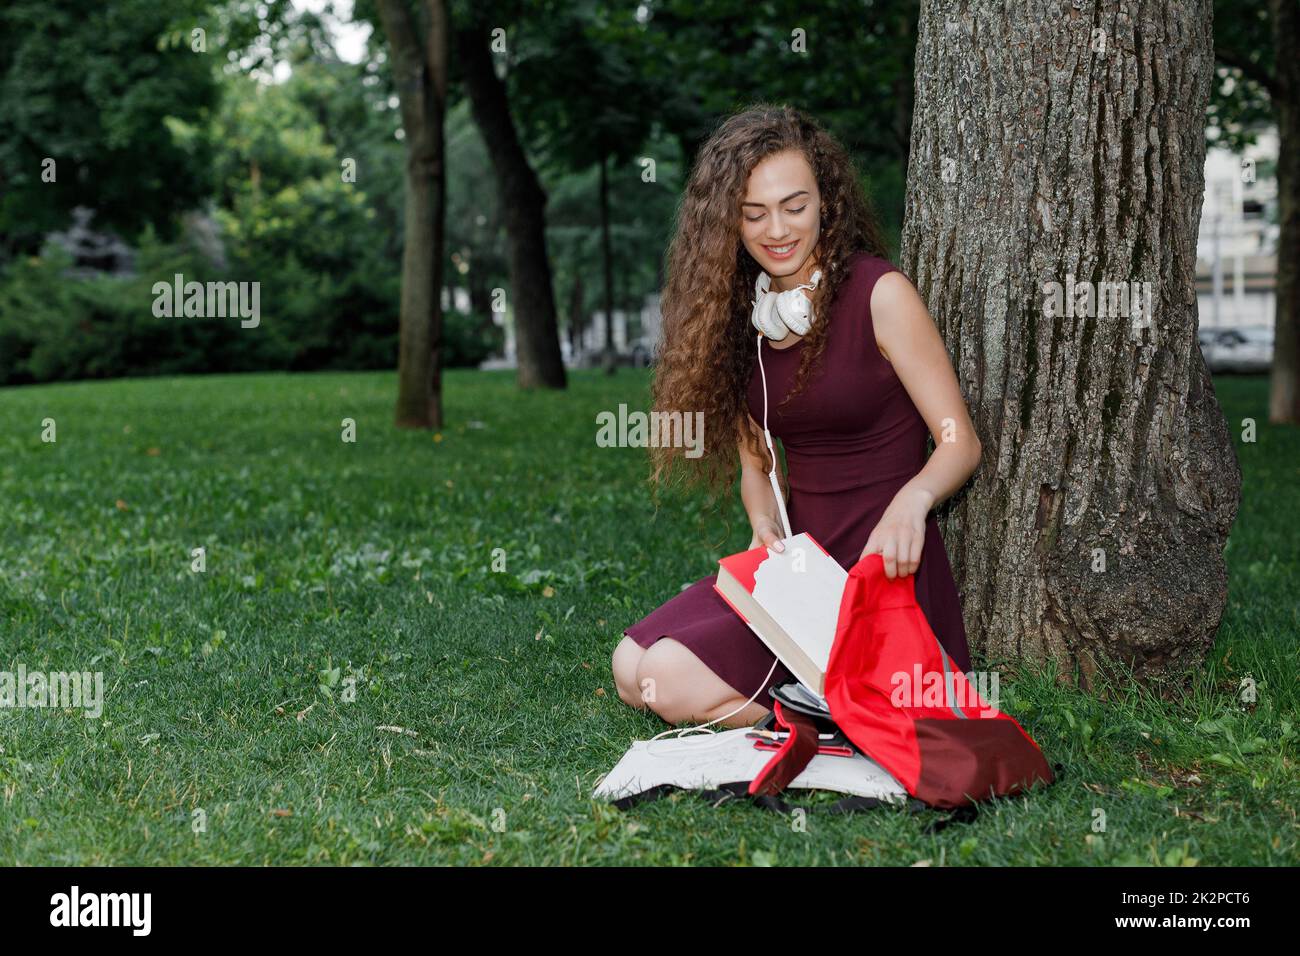 Girl student holding book et assis under tree Banque D'Images